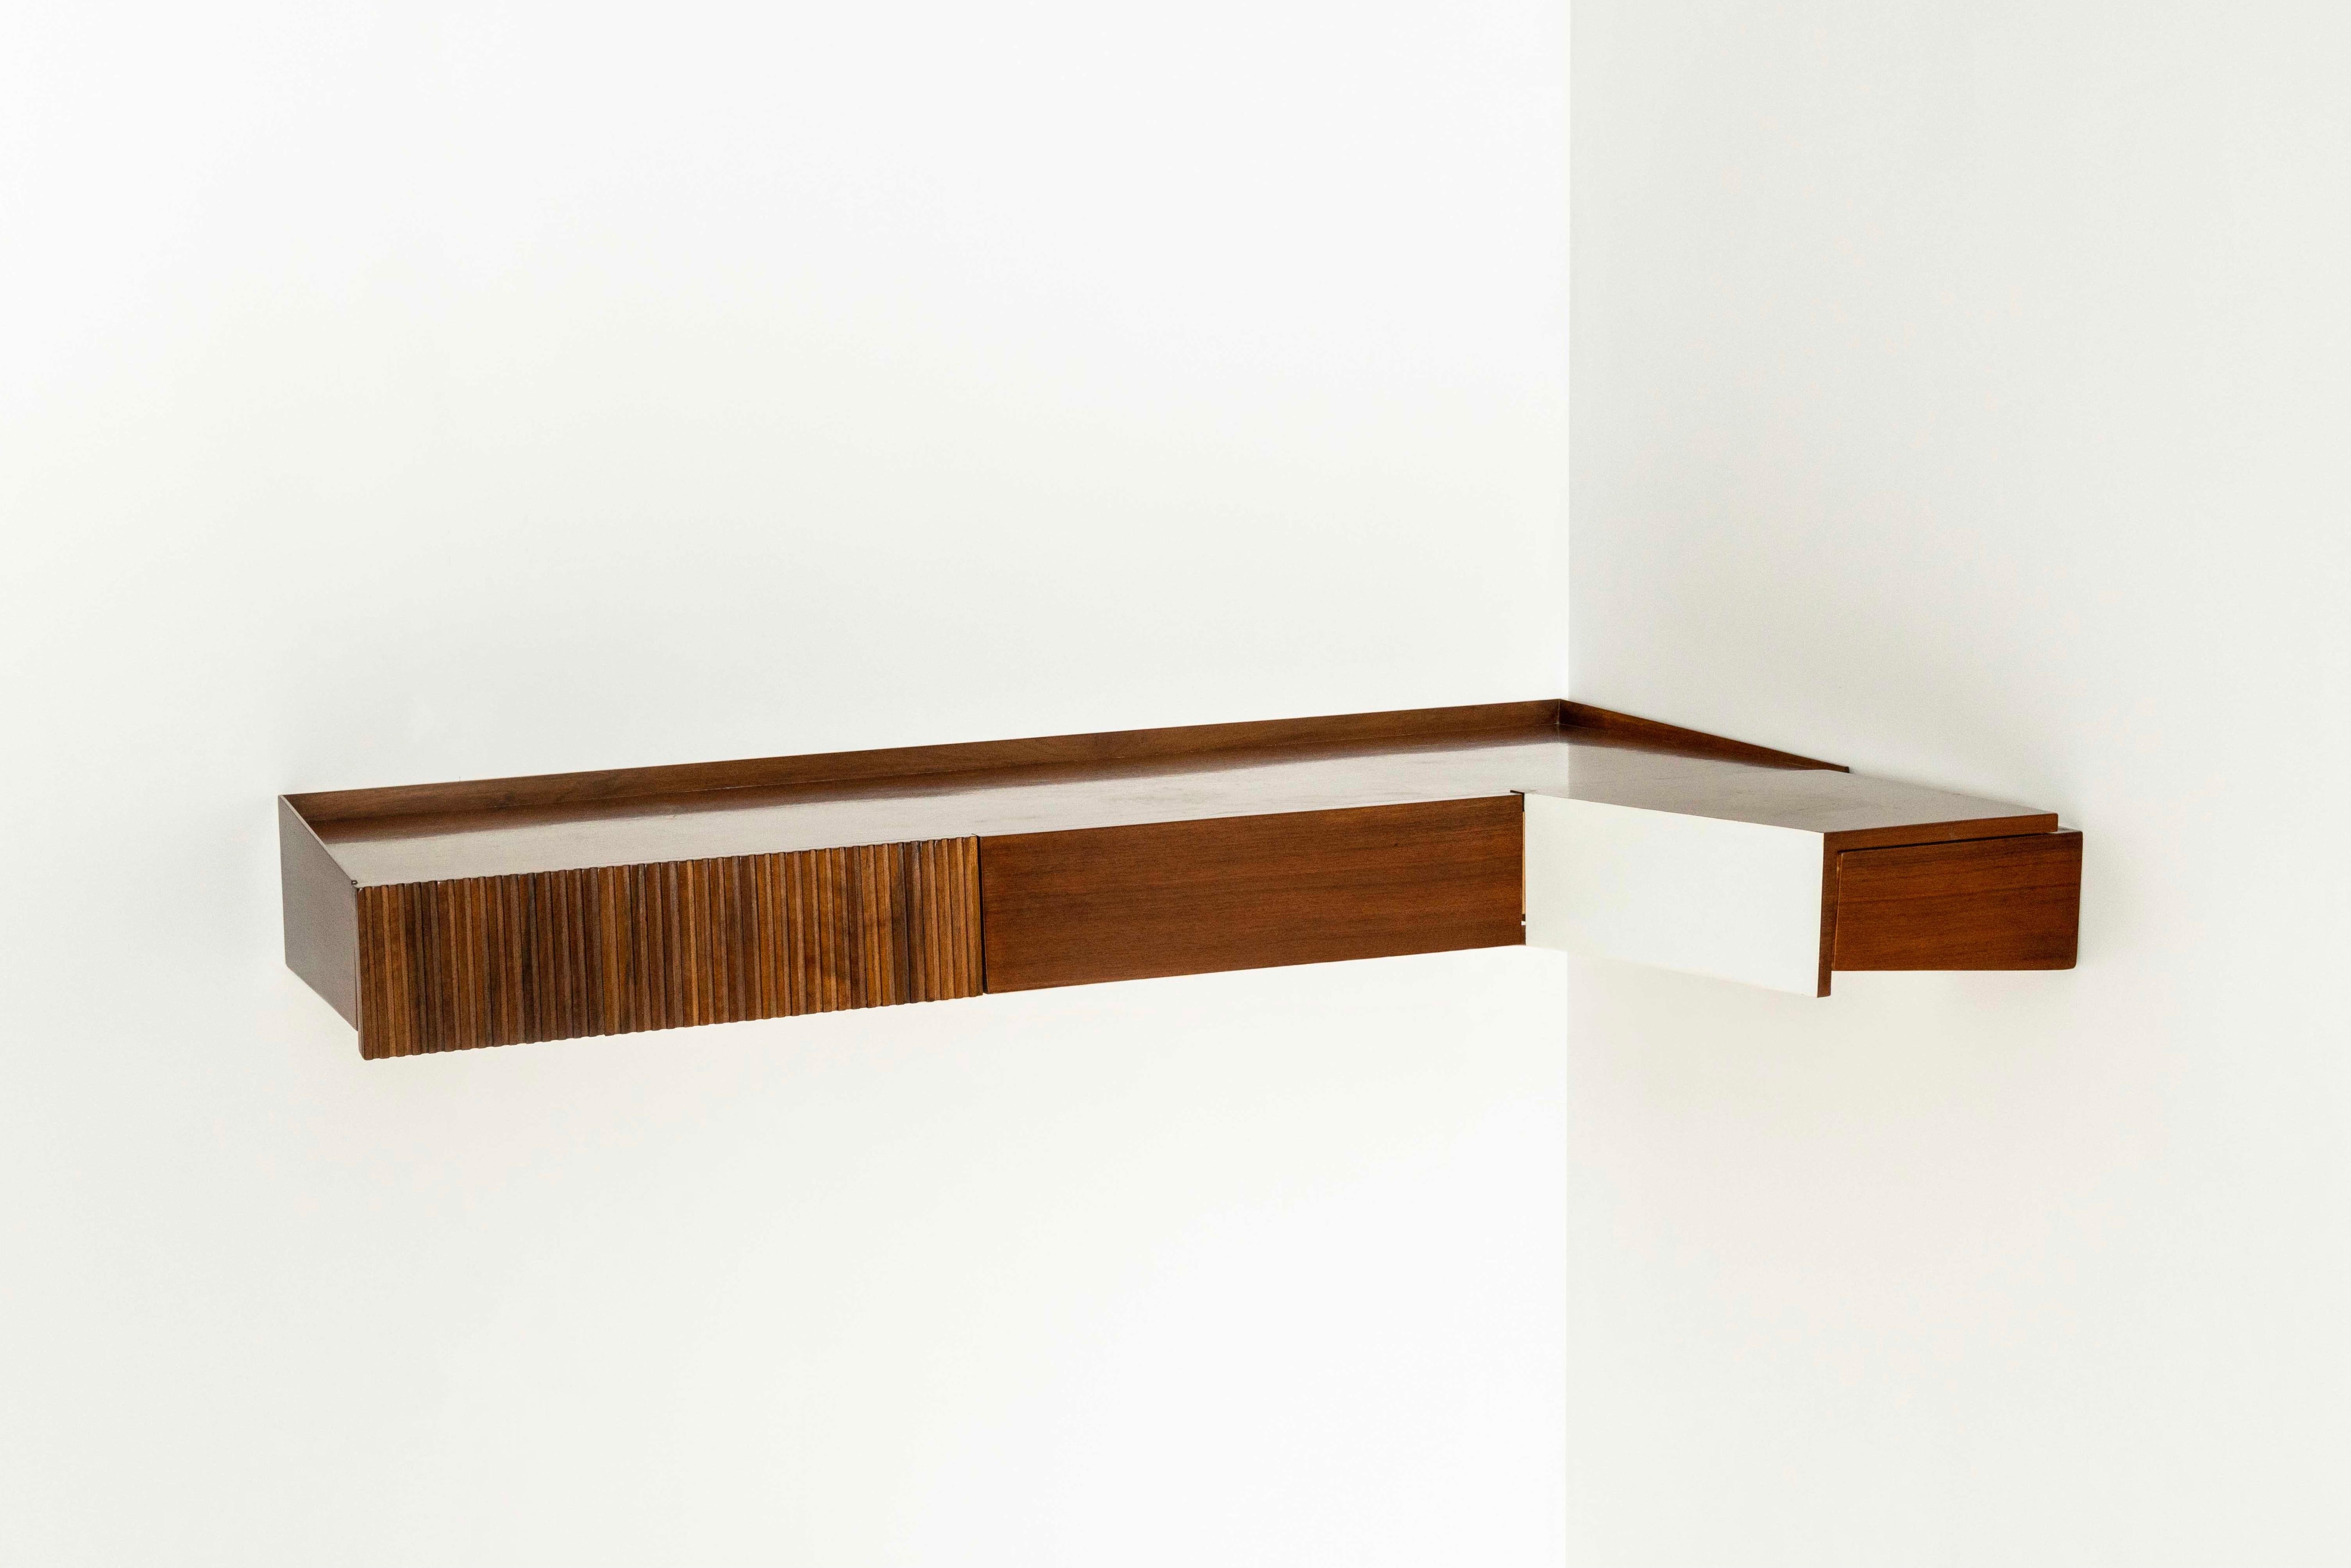 Unique Ico Parisi Hang Corner Shelf in Walnut from Italy 1950s. There is only one known to be made. The corner shelf has two flush drawers one that features a vertical textured effect, called 'grissinatura'. The top of the shorter side is connected